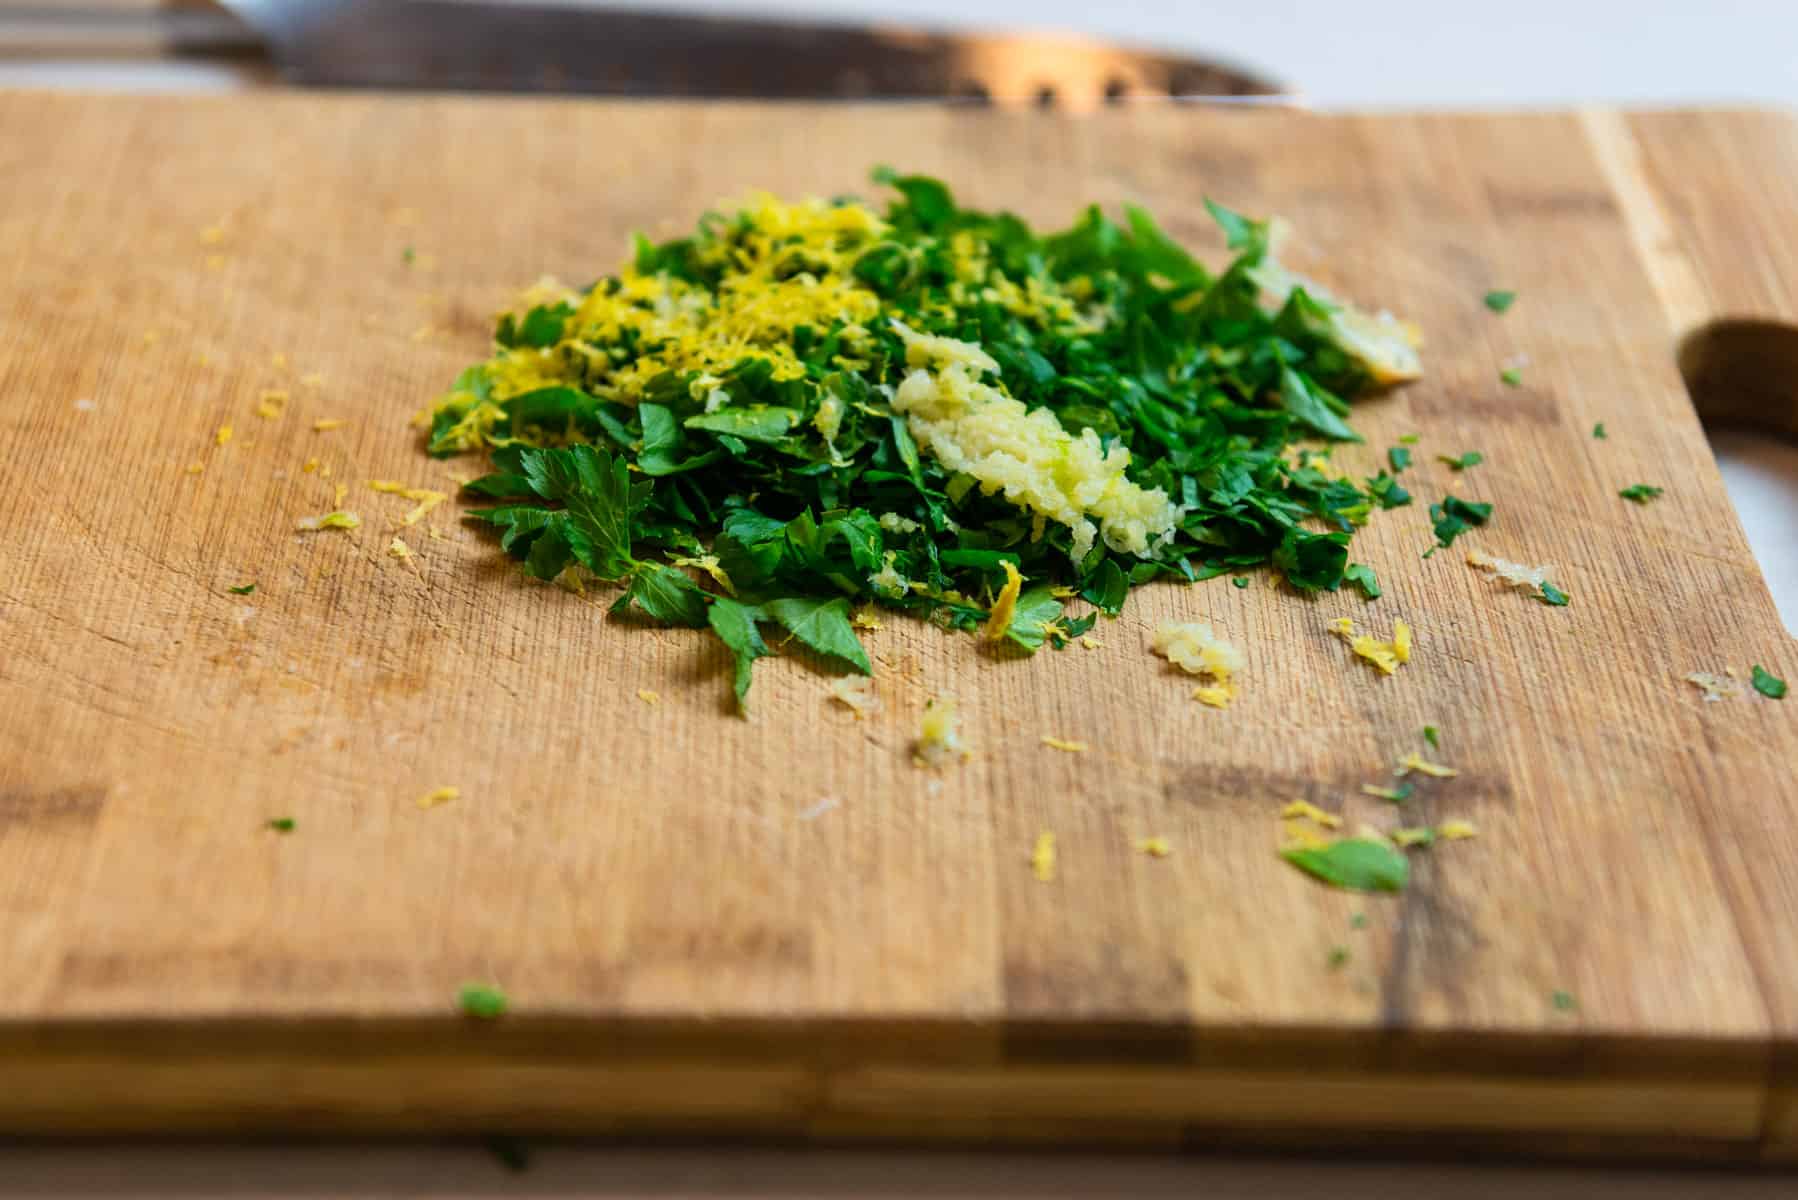 Add grated garlic to the parsley and lemon zest mixture.